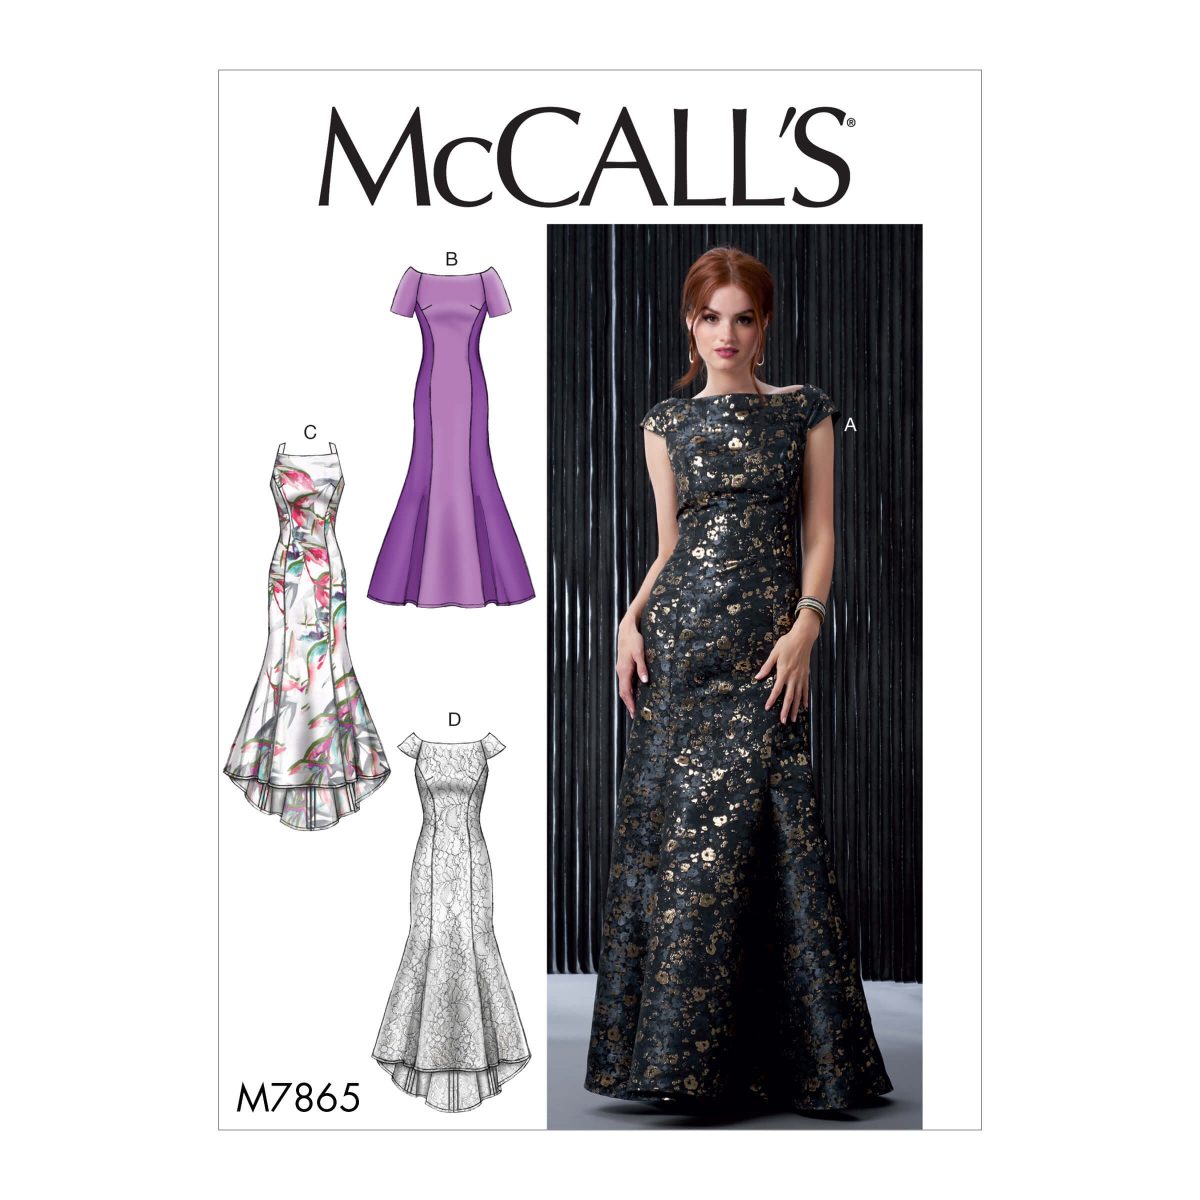 McCall's Sewing Pattern M7865 Misses' Dresses